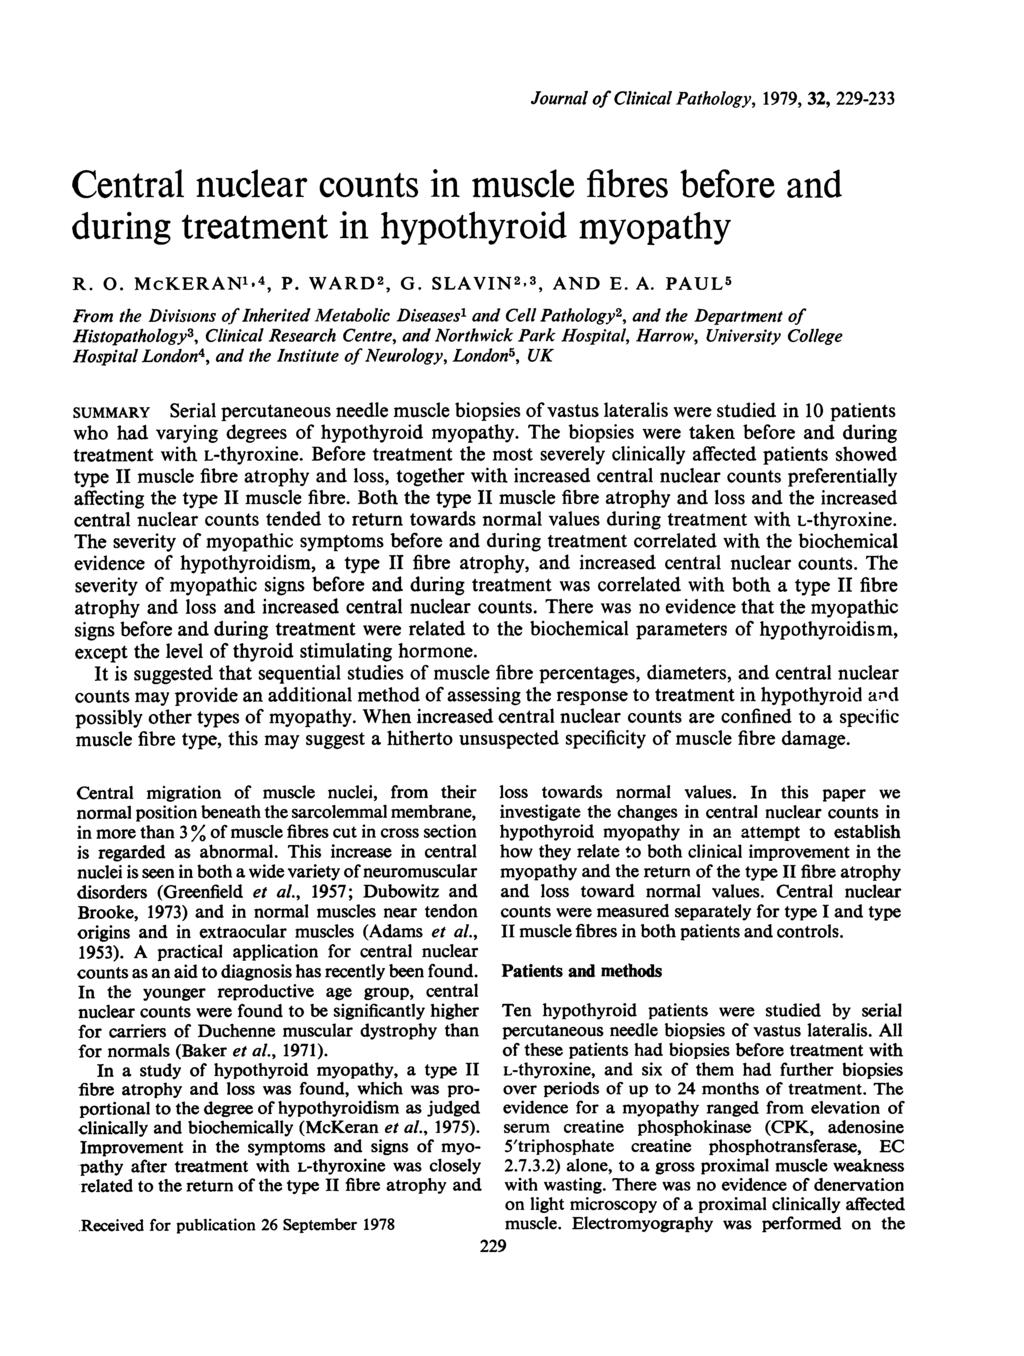 Journal of Clinical Pathology, 1979, 32, 229-233 Central nuclear counts in muscle fibres before and during in hypothyroid myopathy R. 0. McKERAN",4, P. WARD2, G. SLAVIN2 3, AN